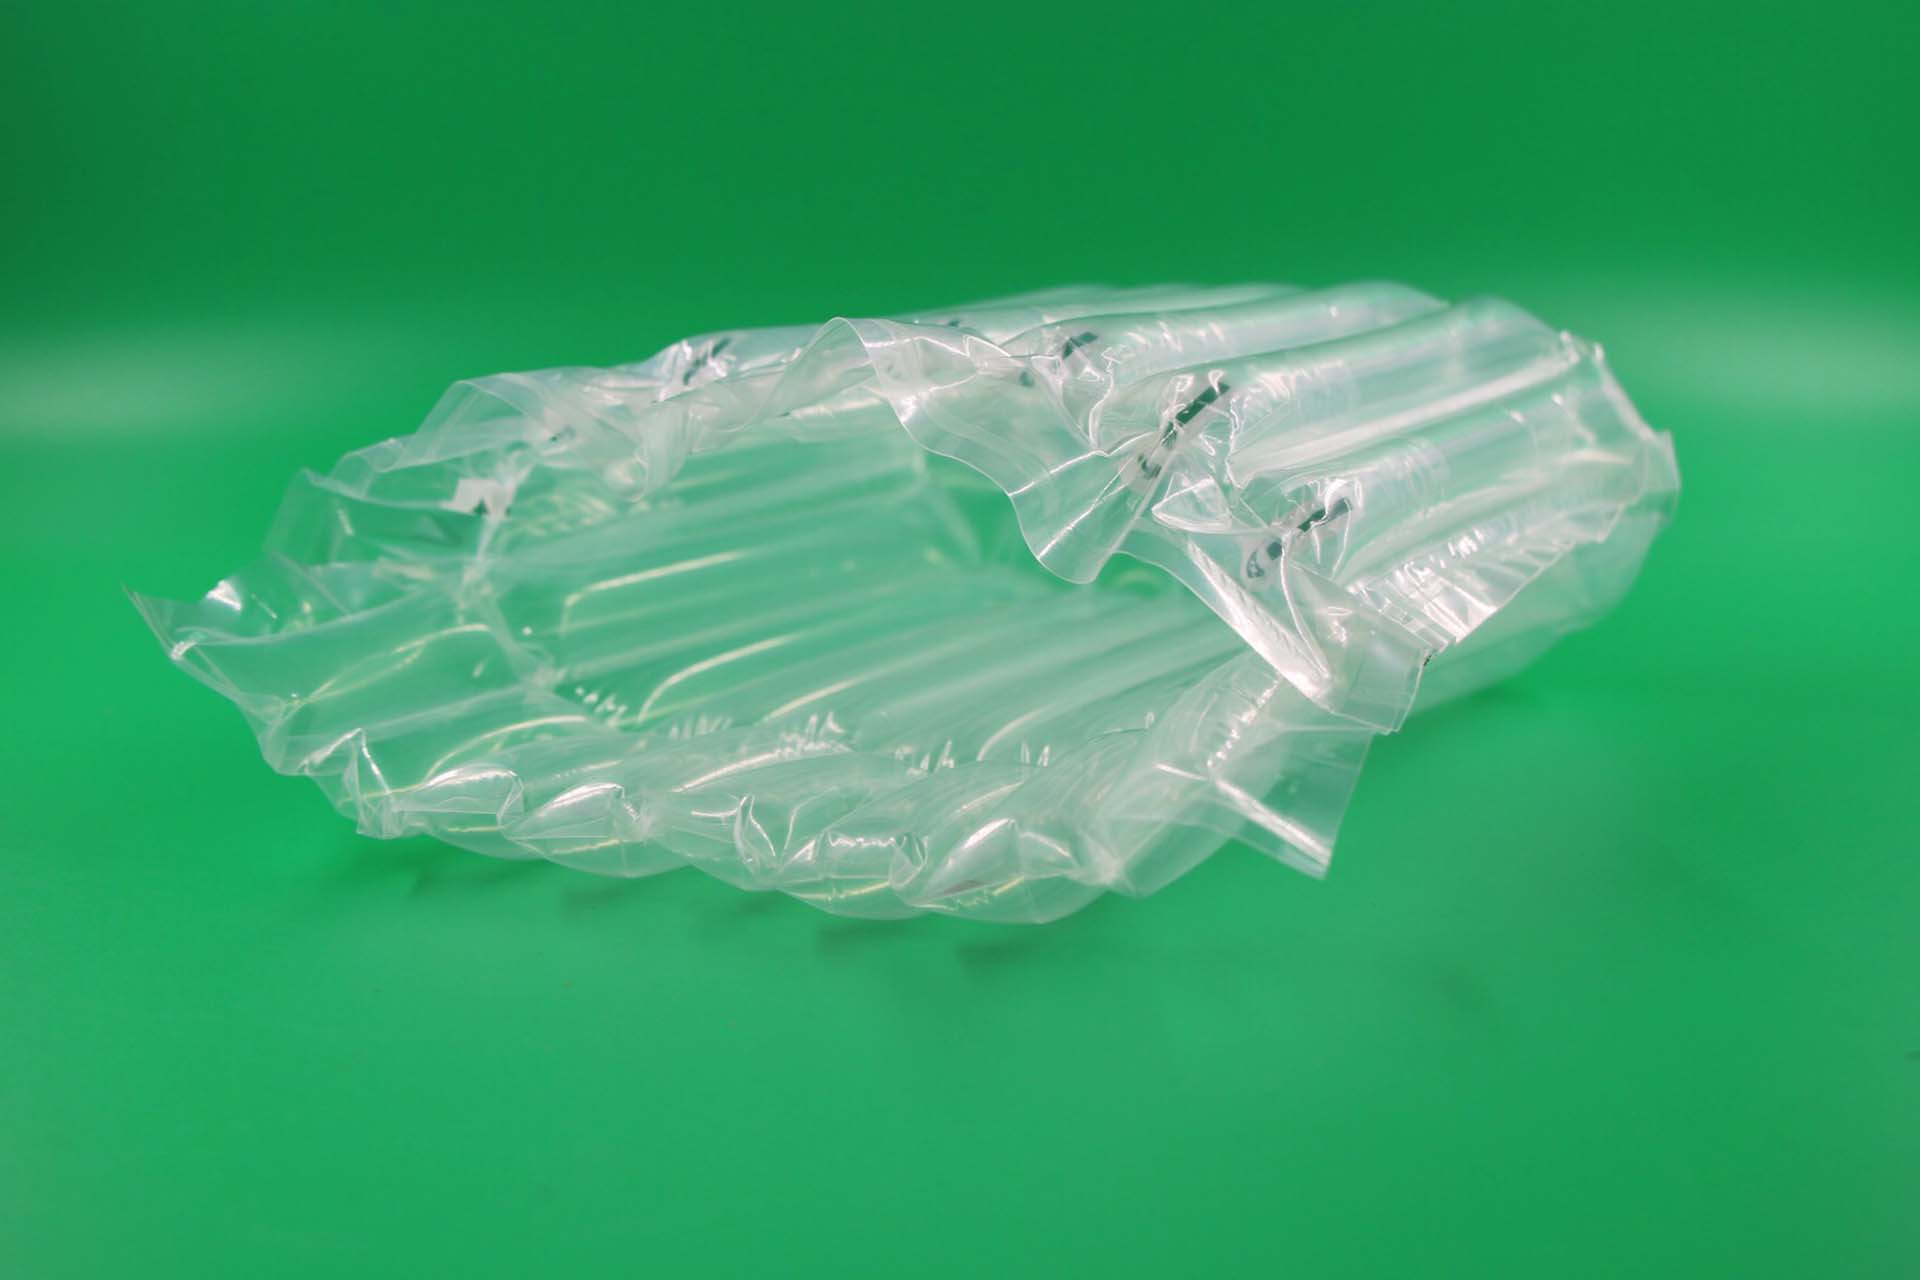 Sunshinepack favorable-price air filled packaging OEM for package